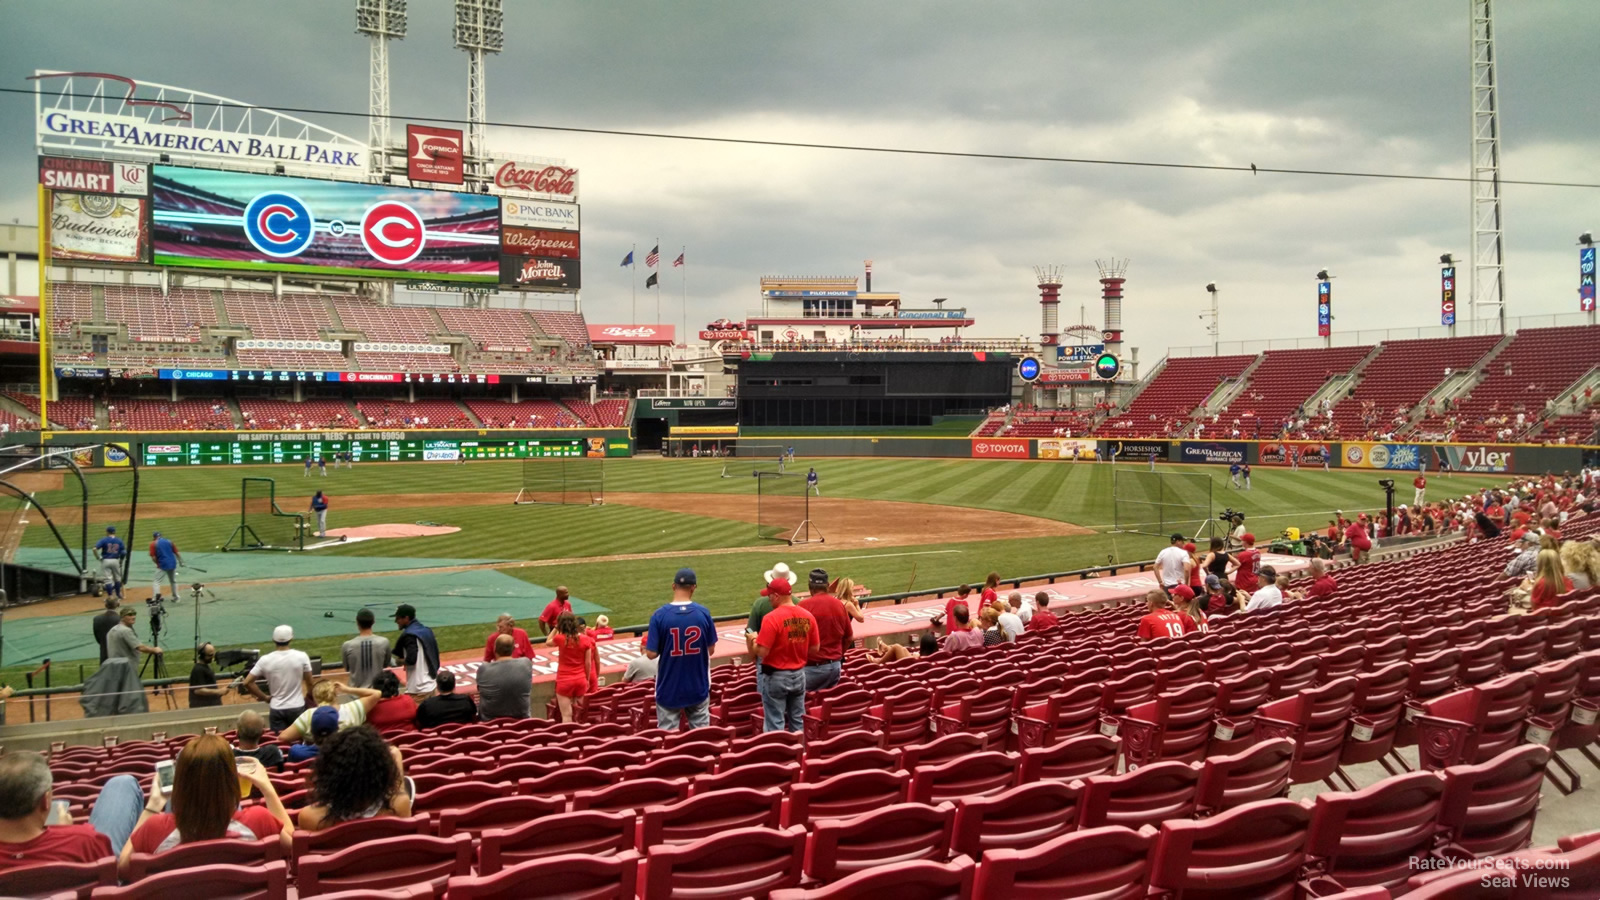 Section 227 at Great American Ball Park 